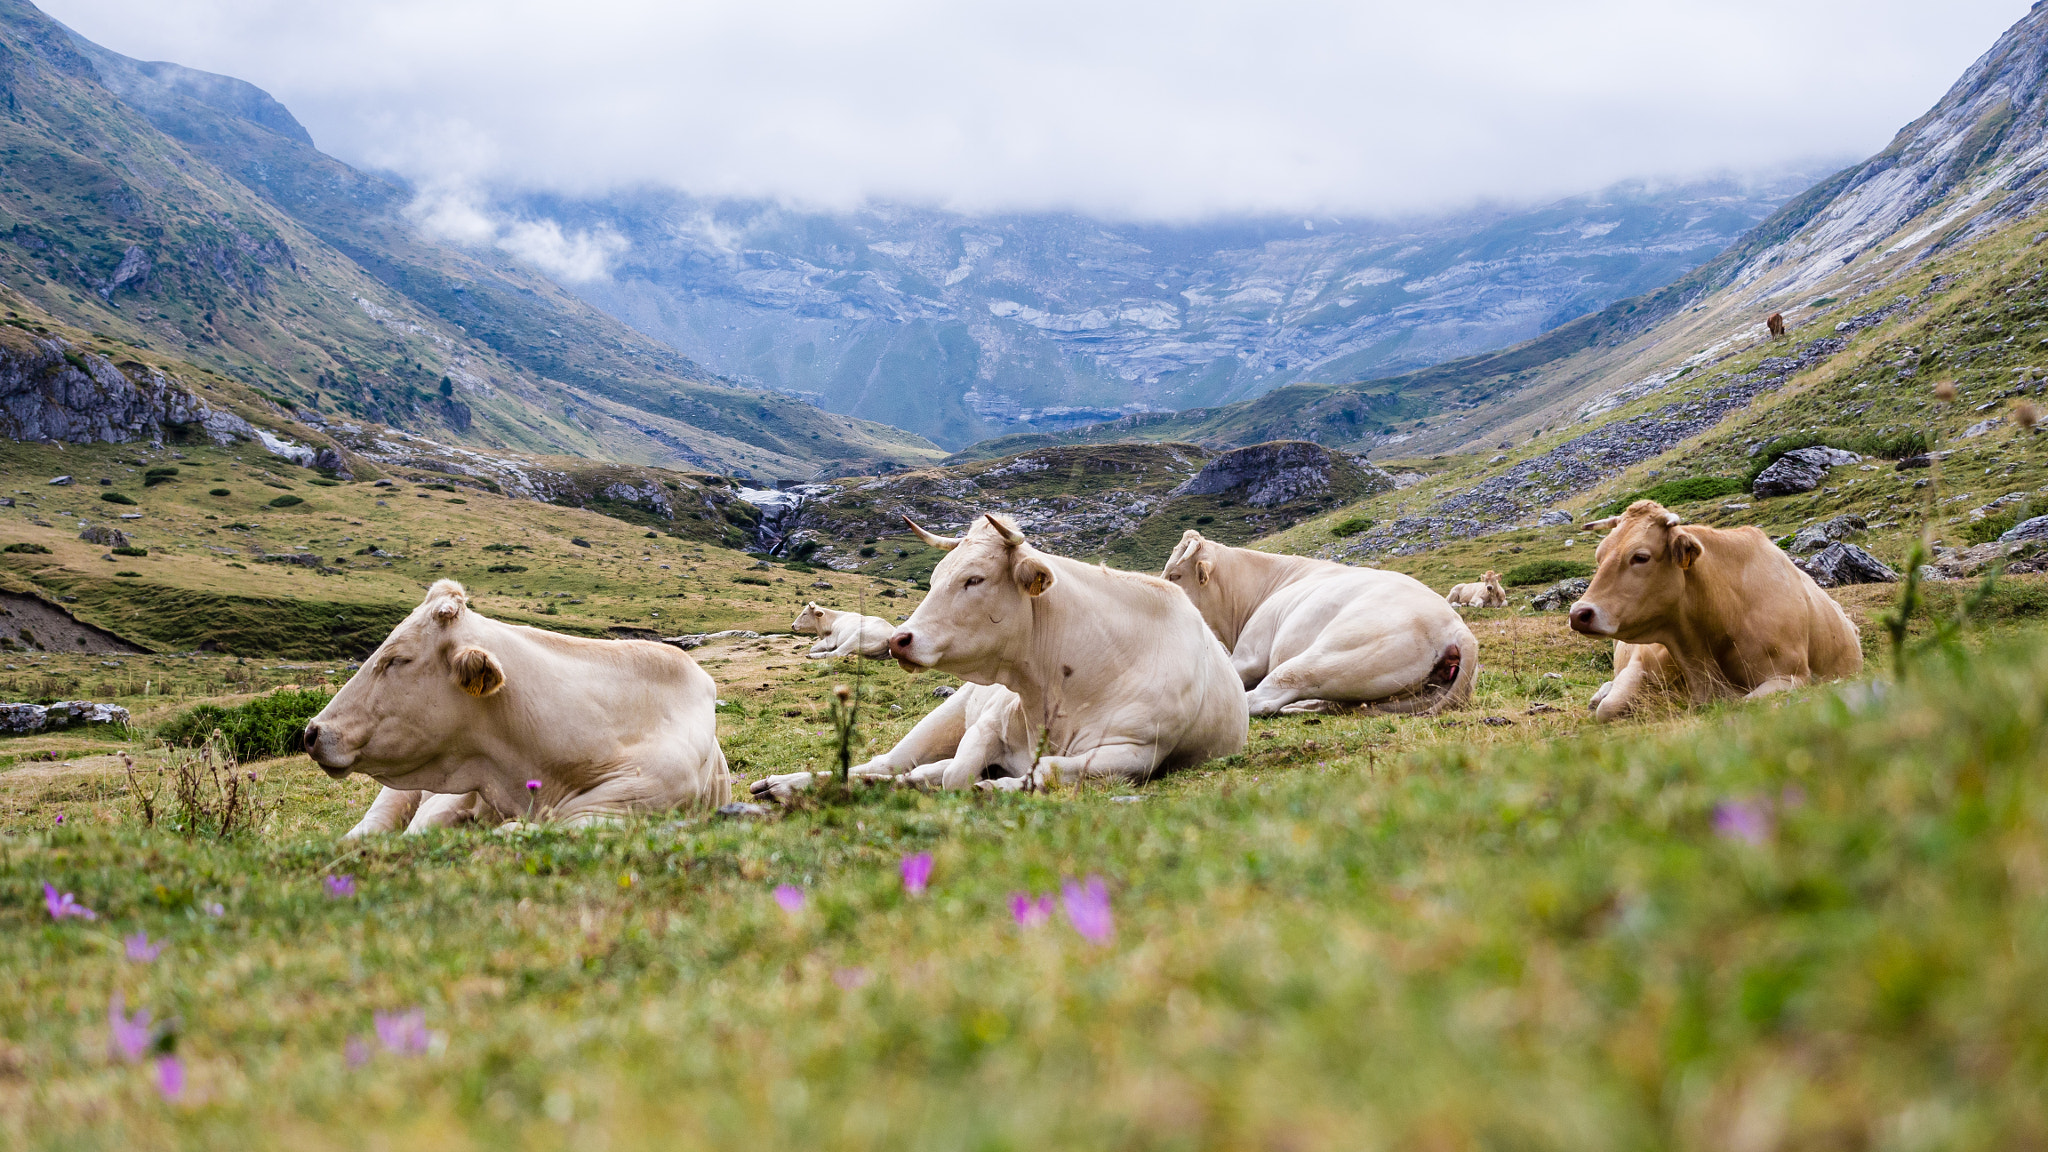 Olympus PEN E-PL5 sample photo. Cows in the mountain photography